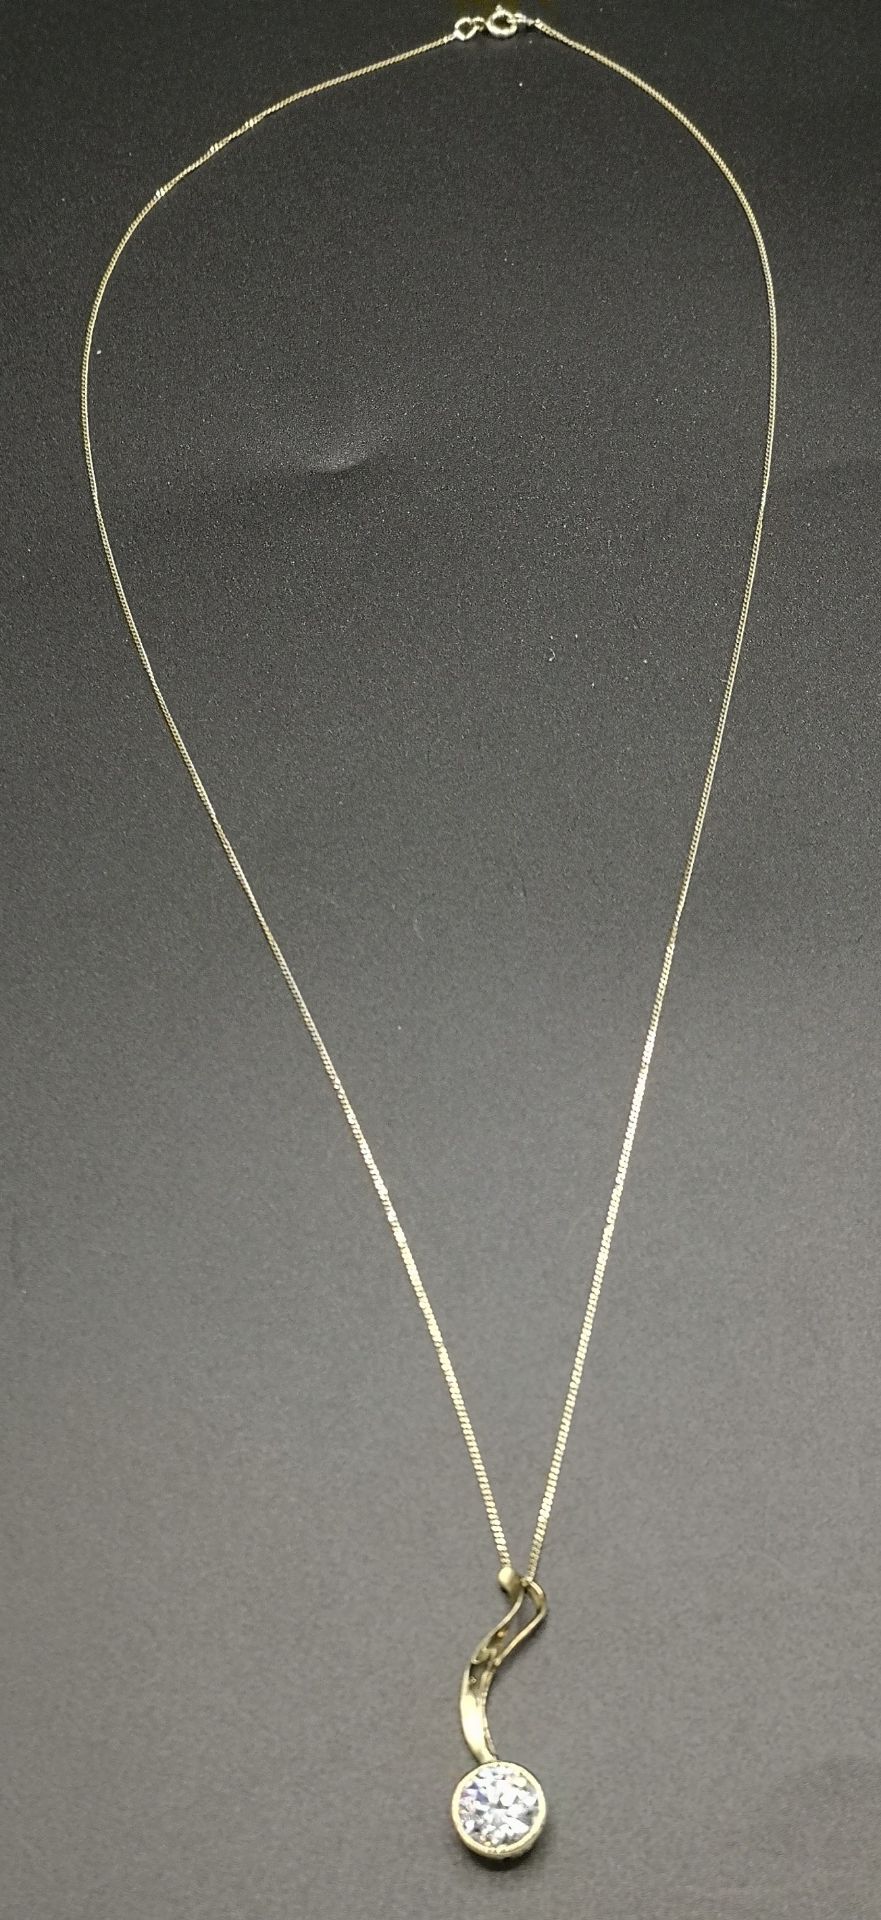 9ct gold necklace with 14ct gold pendant